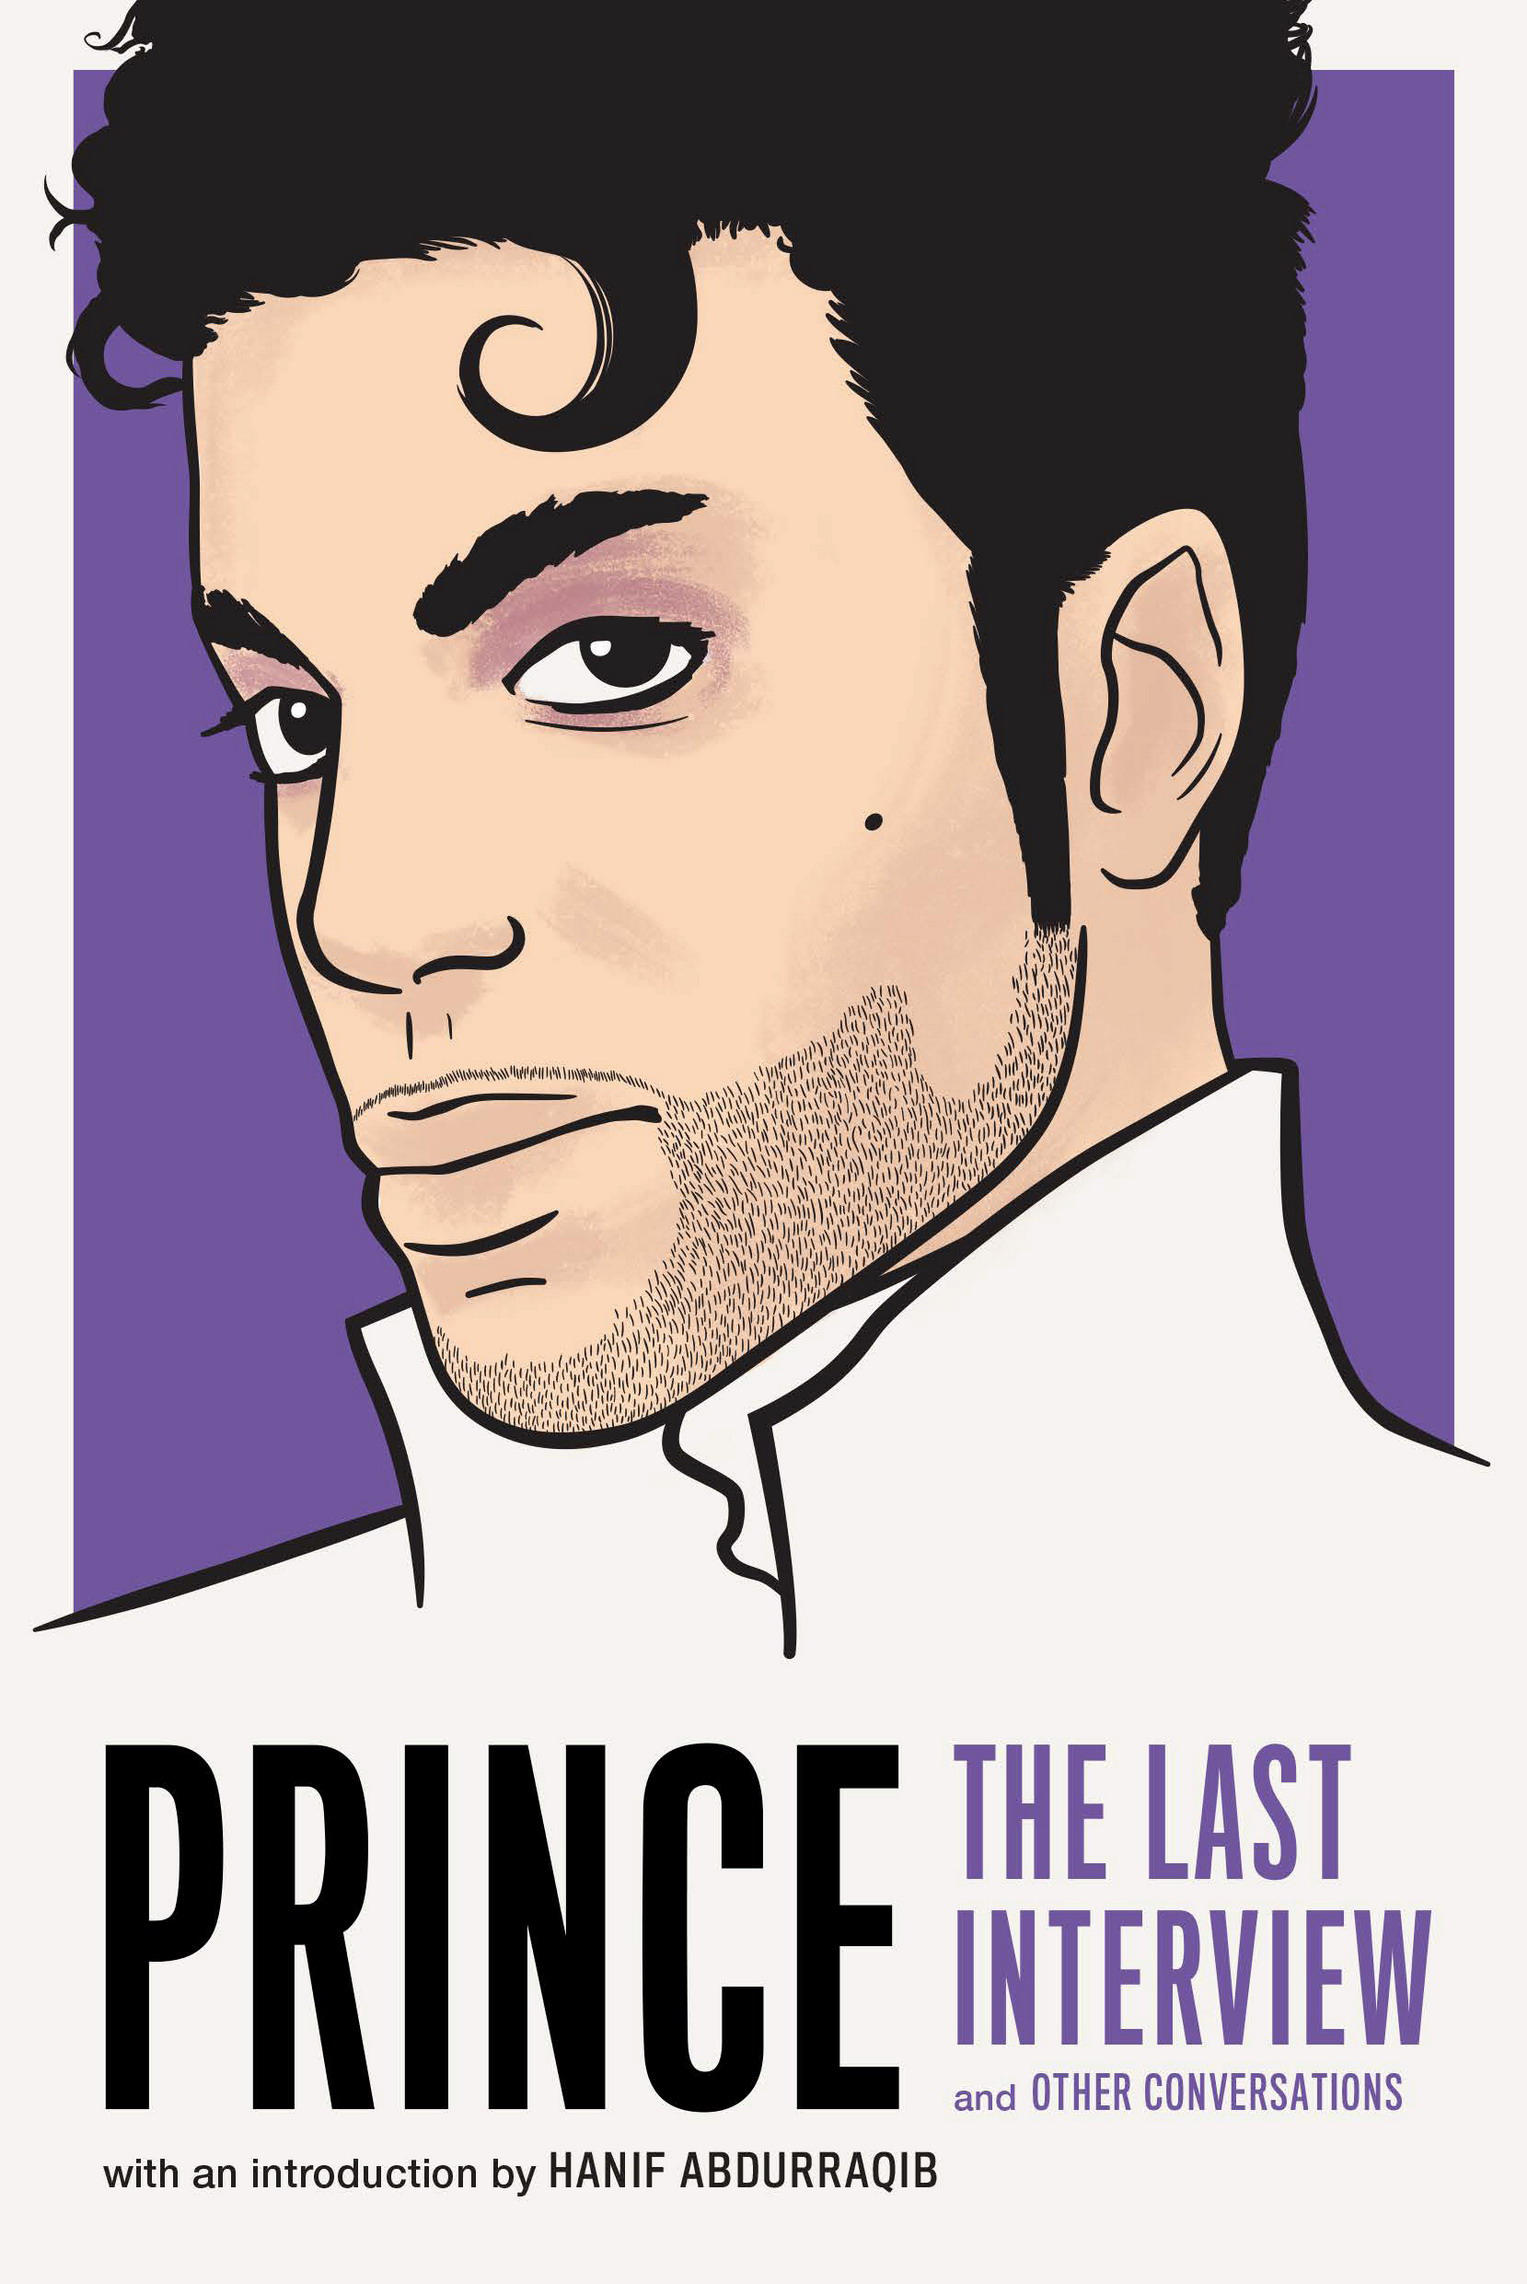 PRINCE THE LAST INTERVIEW AND OTHER CONVERSATIONS Copyright 2019 by Melville - photo 1